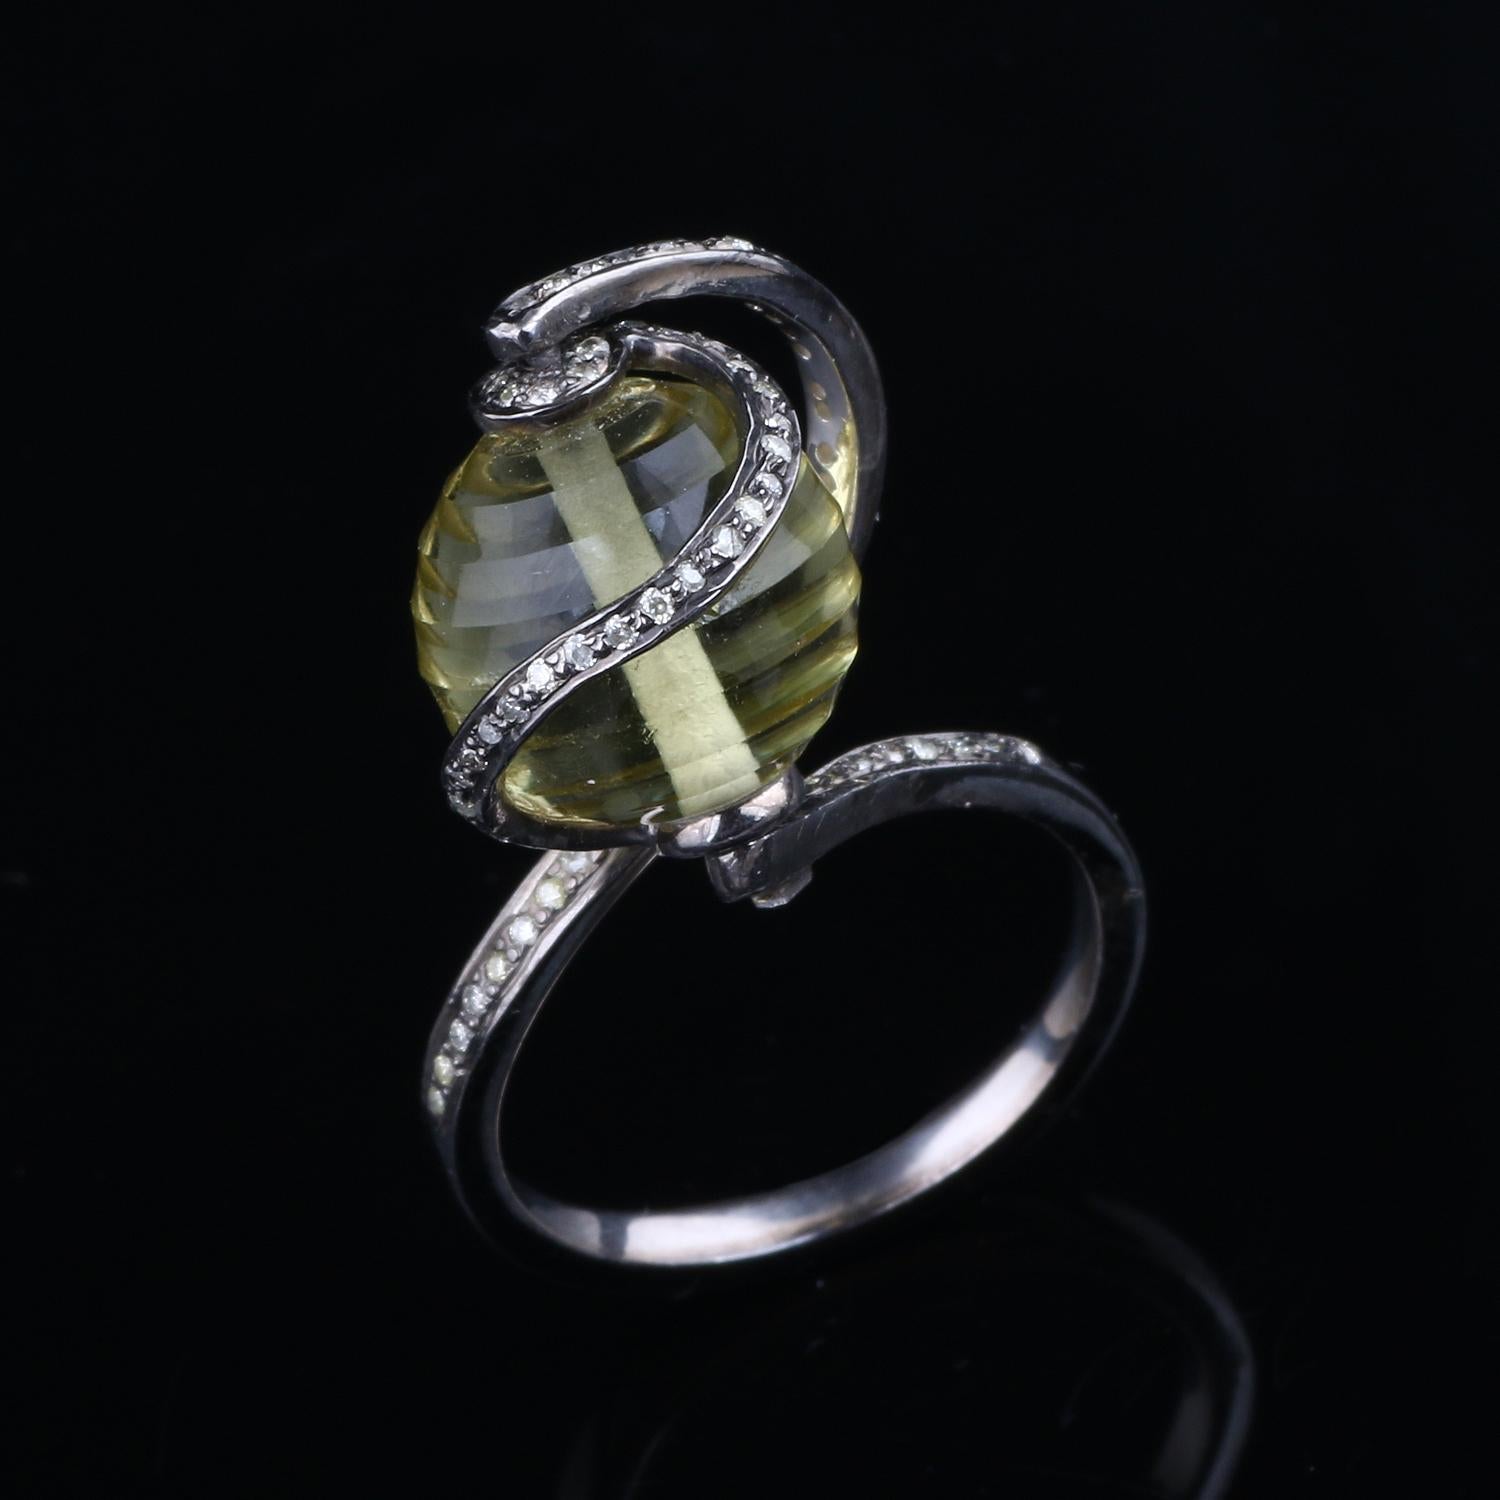 Item details:-

✦ SKU:- ESRG00203

✦ Material :- Silver
✦ Gemstone Specification:-
✧ Diamond
✧ Lemon Quartz

✦ Approx. Diamond Weight : 0.3
✦ Approx. Silver Weight : 3.69
✦ Approx. Gross Weight : 6.3

Ring Size (US): 8

You will Get the same Product